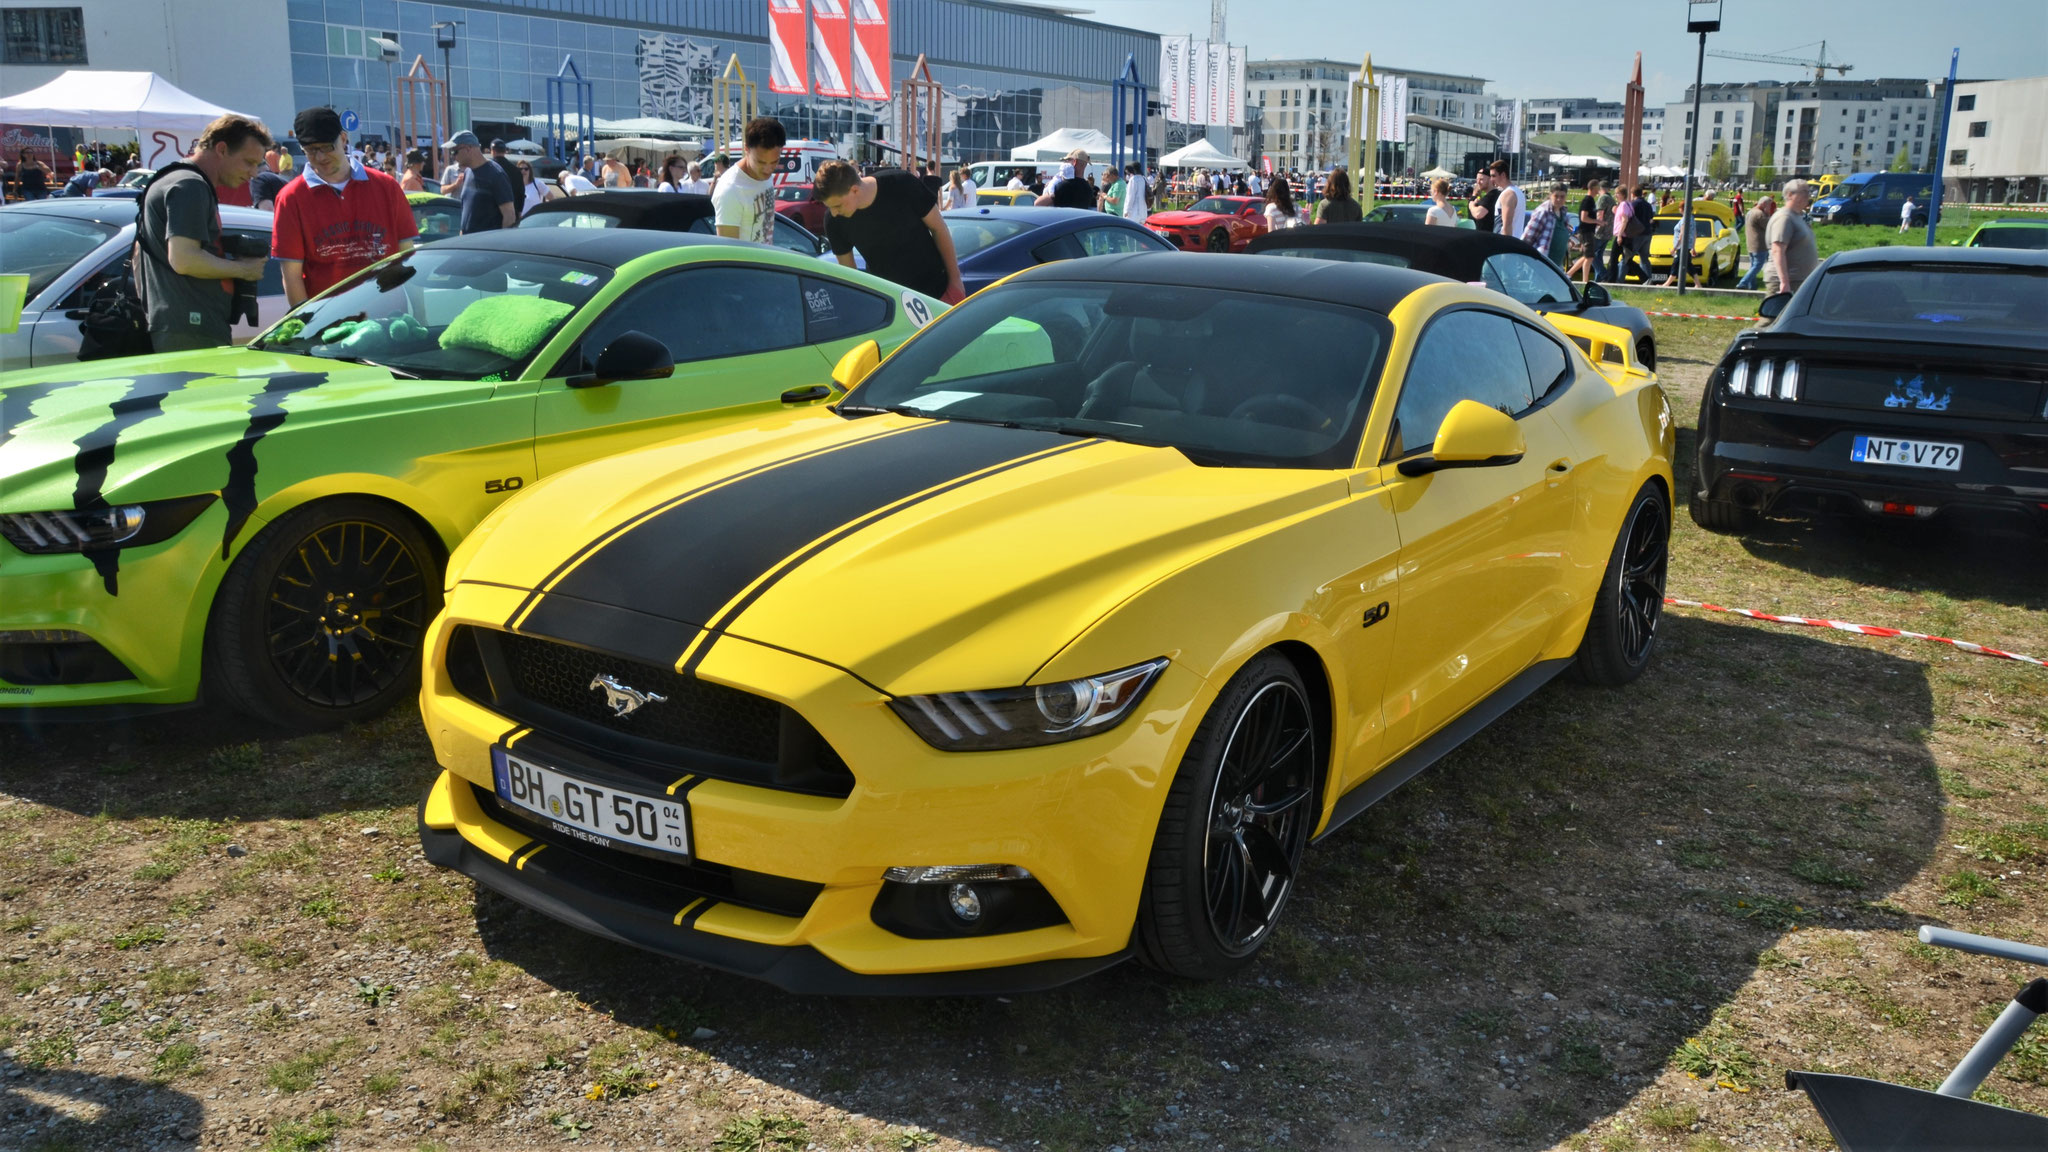 Ford Mustang GT - BH-GT50